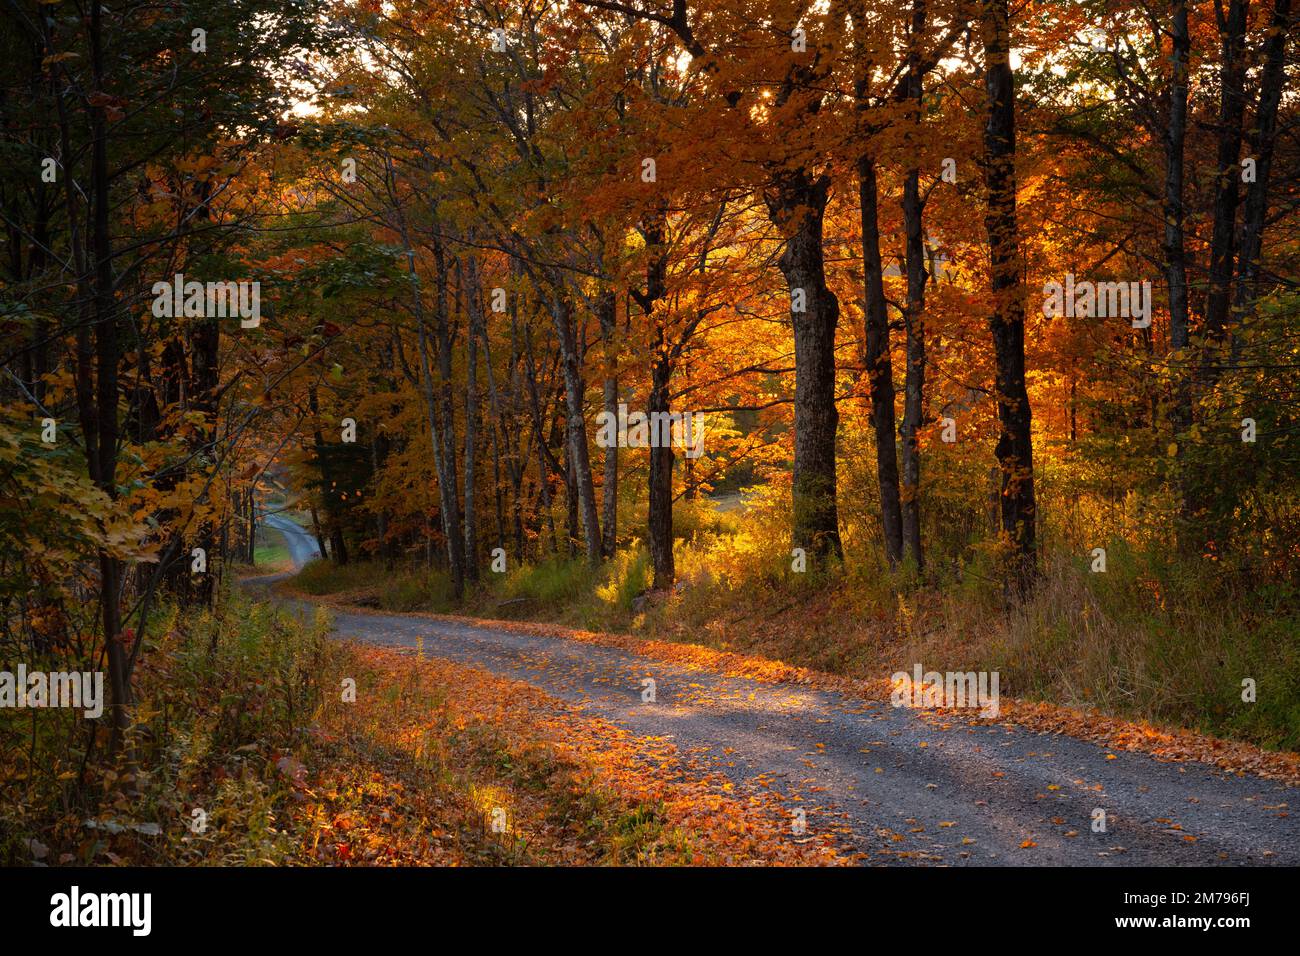 Upstate New York, U.S.A - October 17, 2022 - A Road With Sharp